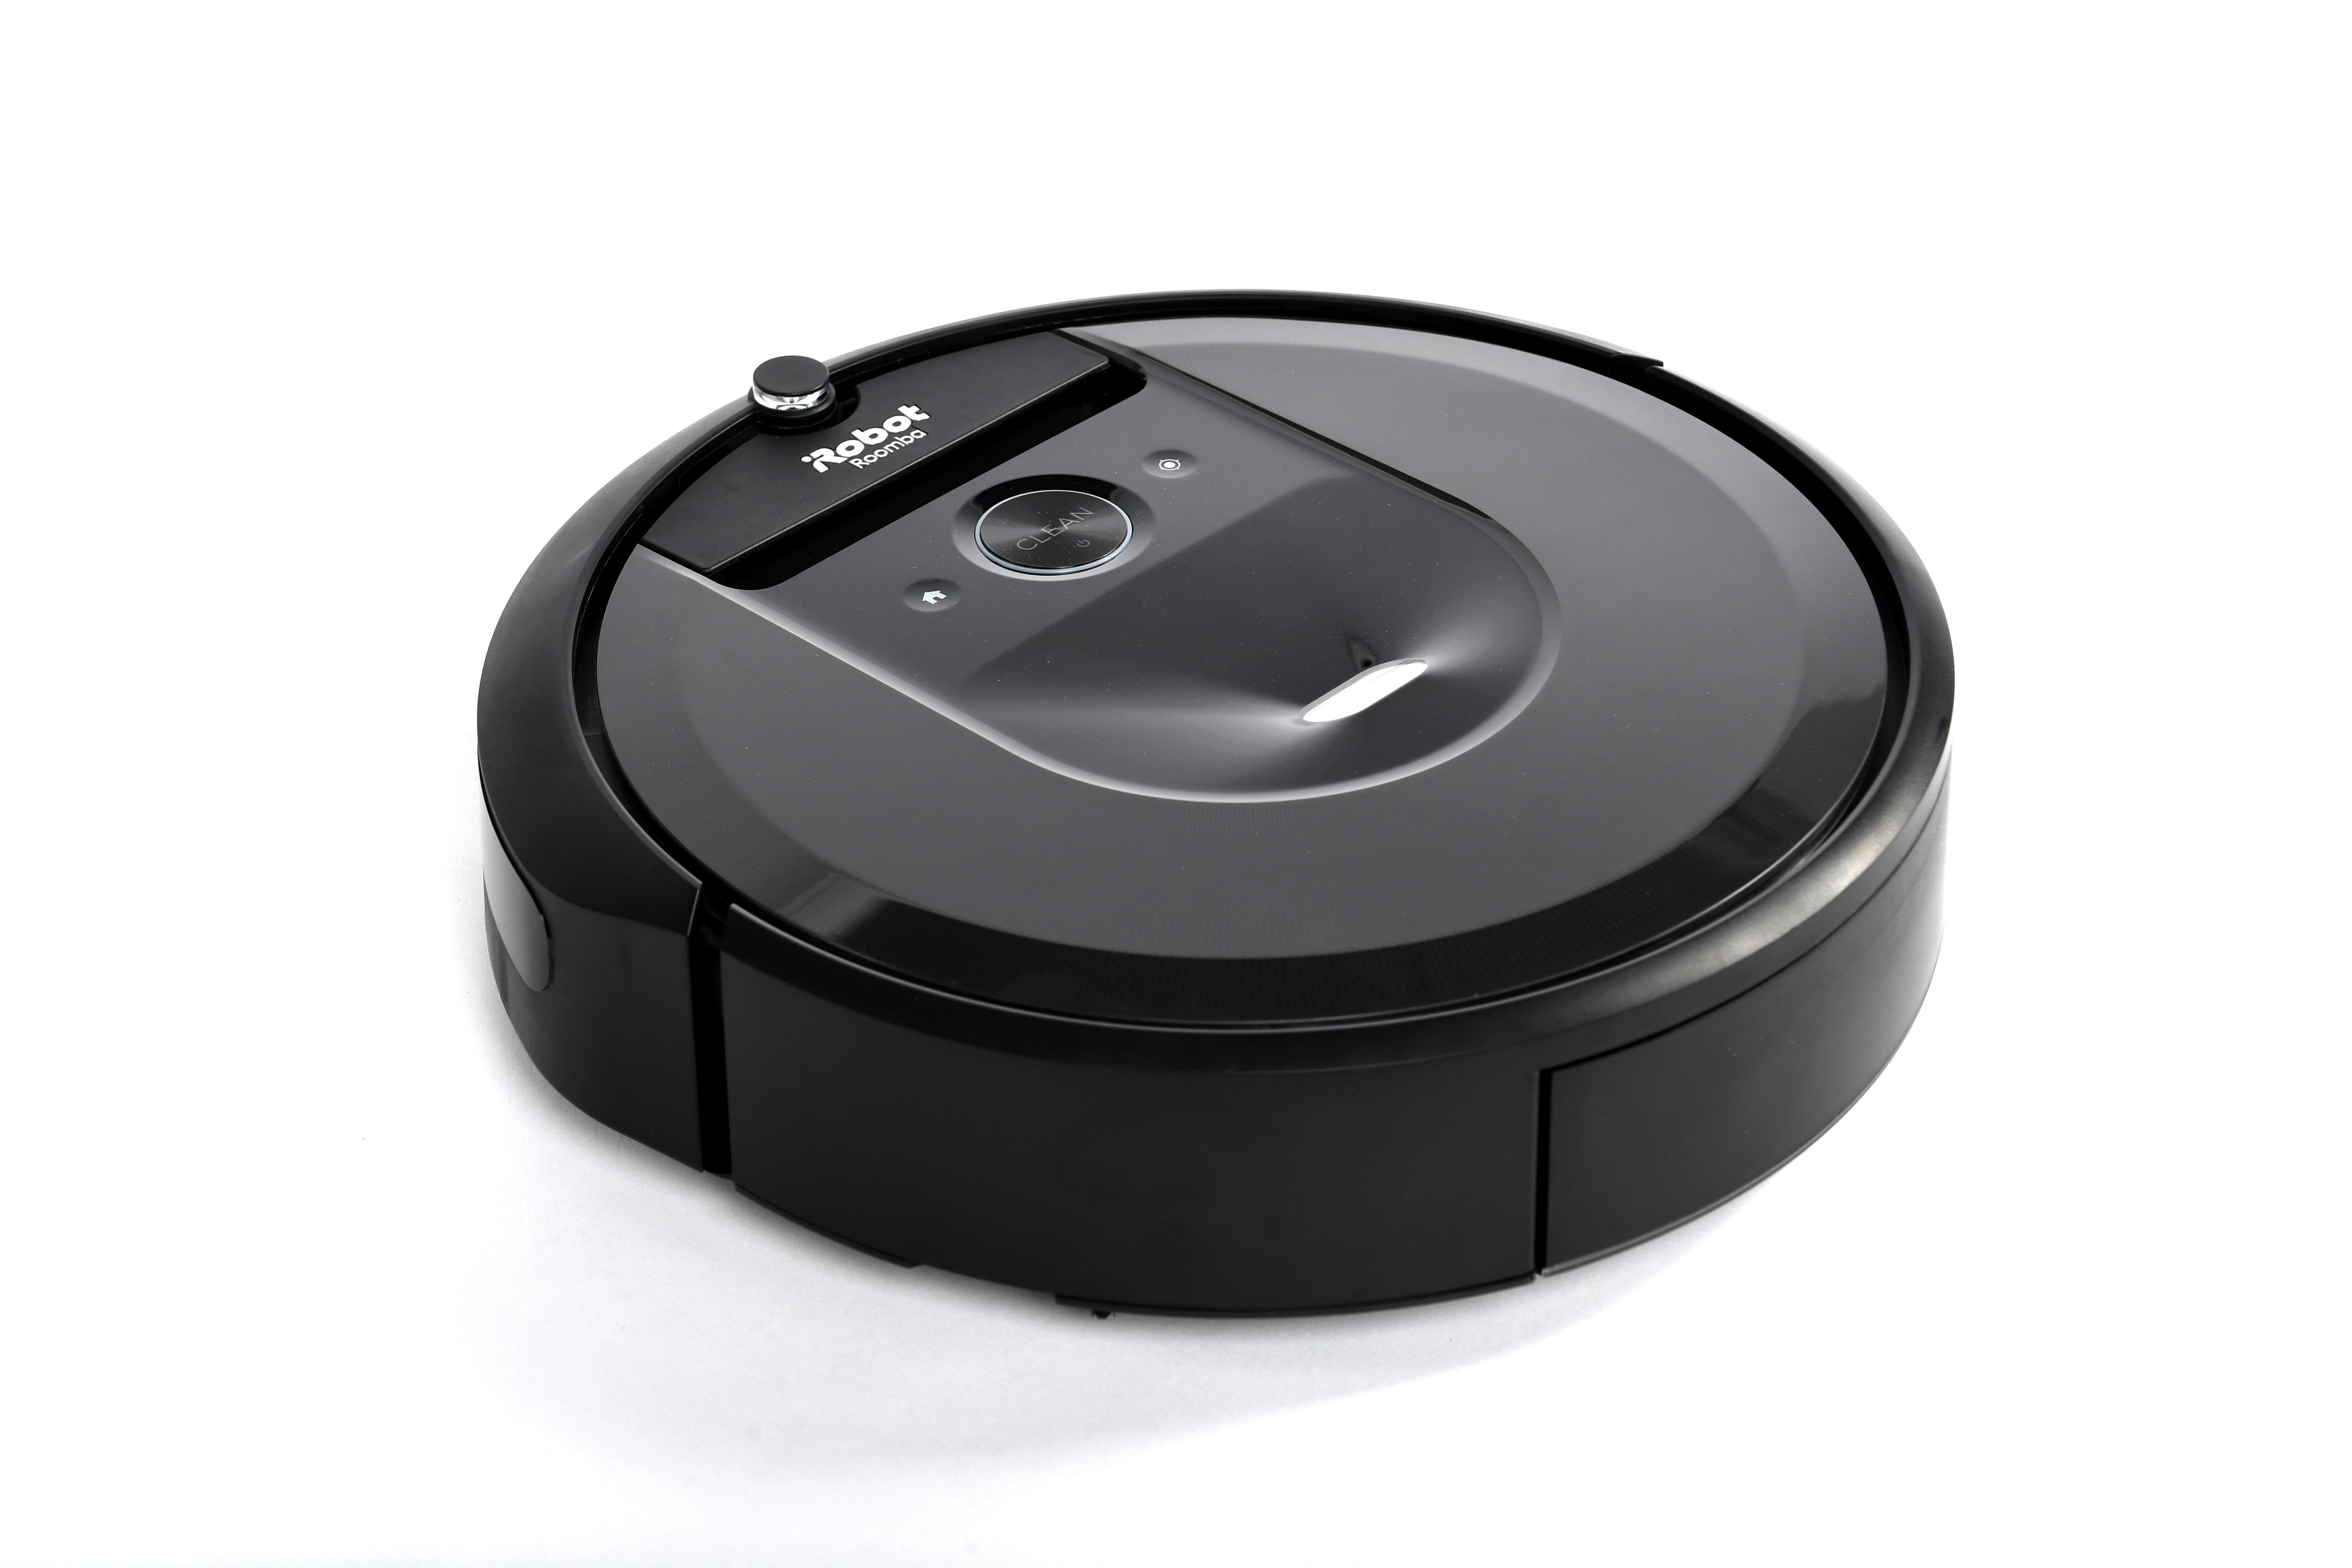 EU Commission lawyers initially opposed warning  on iRobot